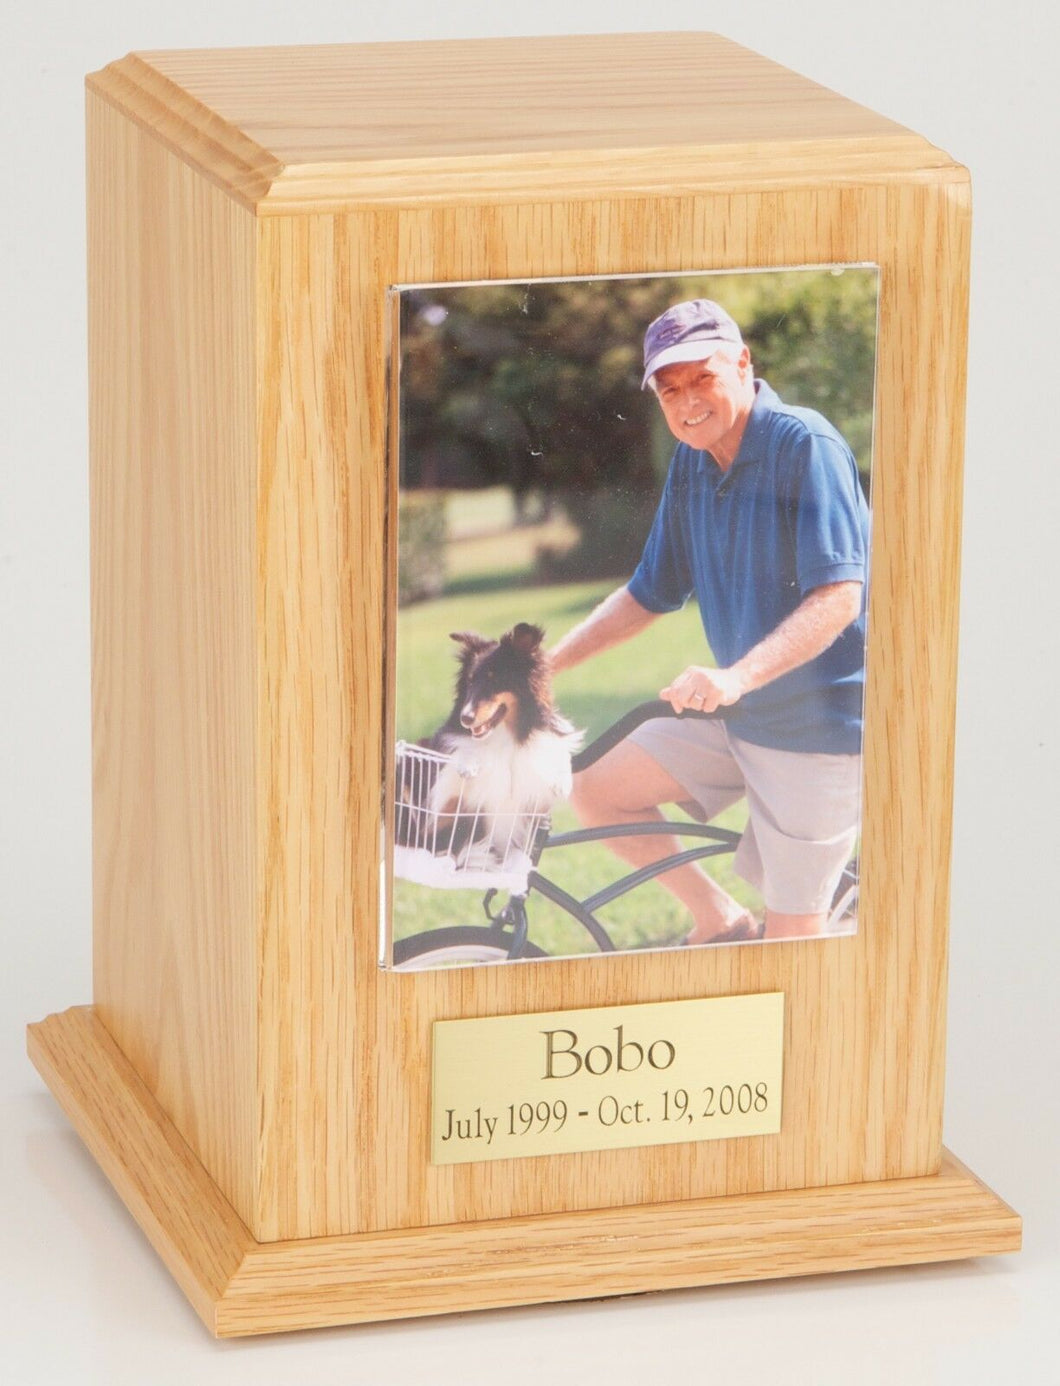 Small 35 Cubic Inches Oak Pet Tower Photo Urn for Ashes w/Engravable Nameplate